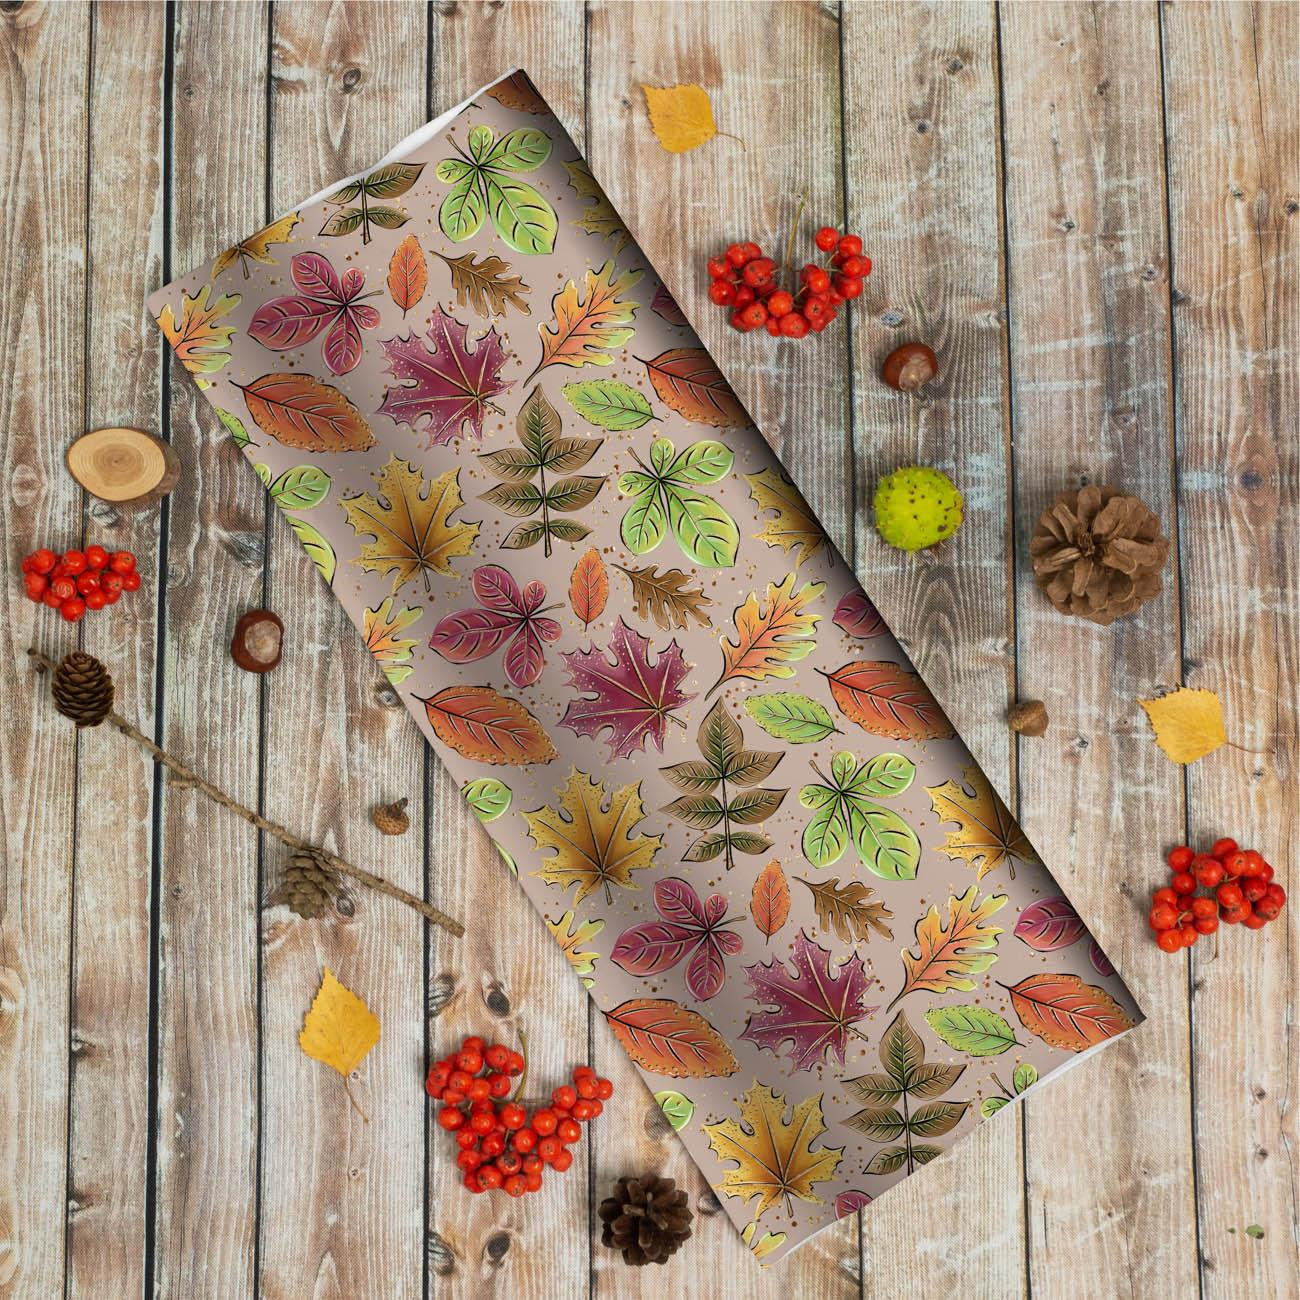 COLORFUL LEAVES MIX / beige (GLITTER AUTUMN) - brushed knit fabric with teddy / alpine fleece